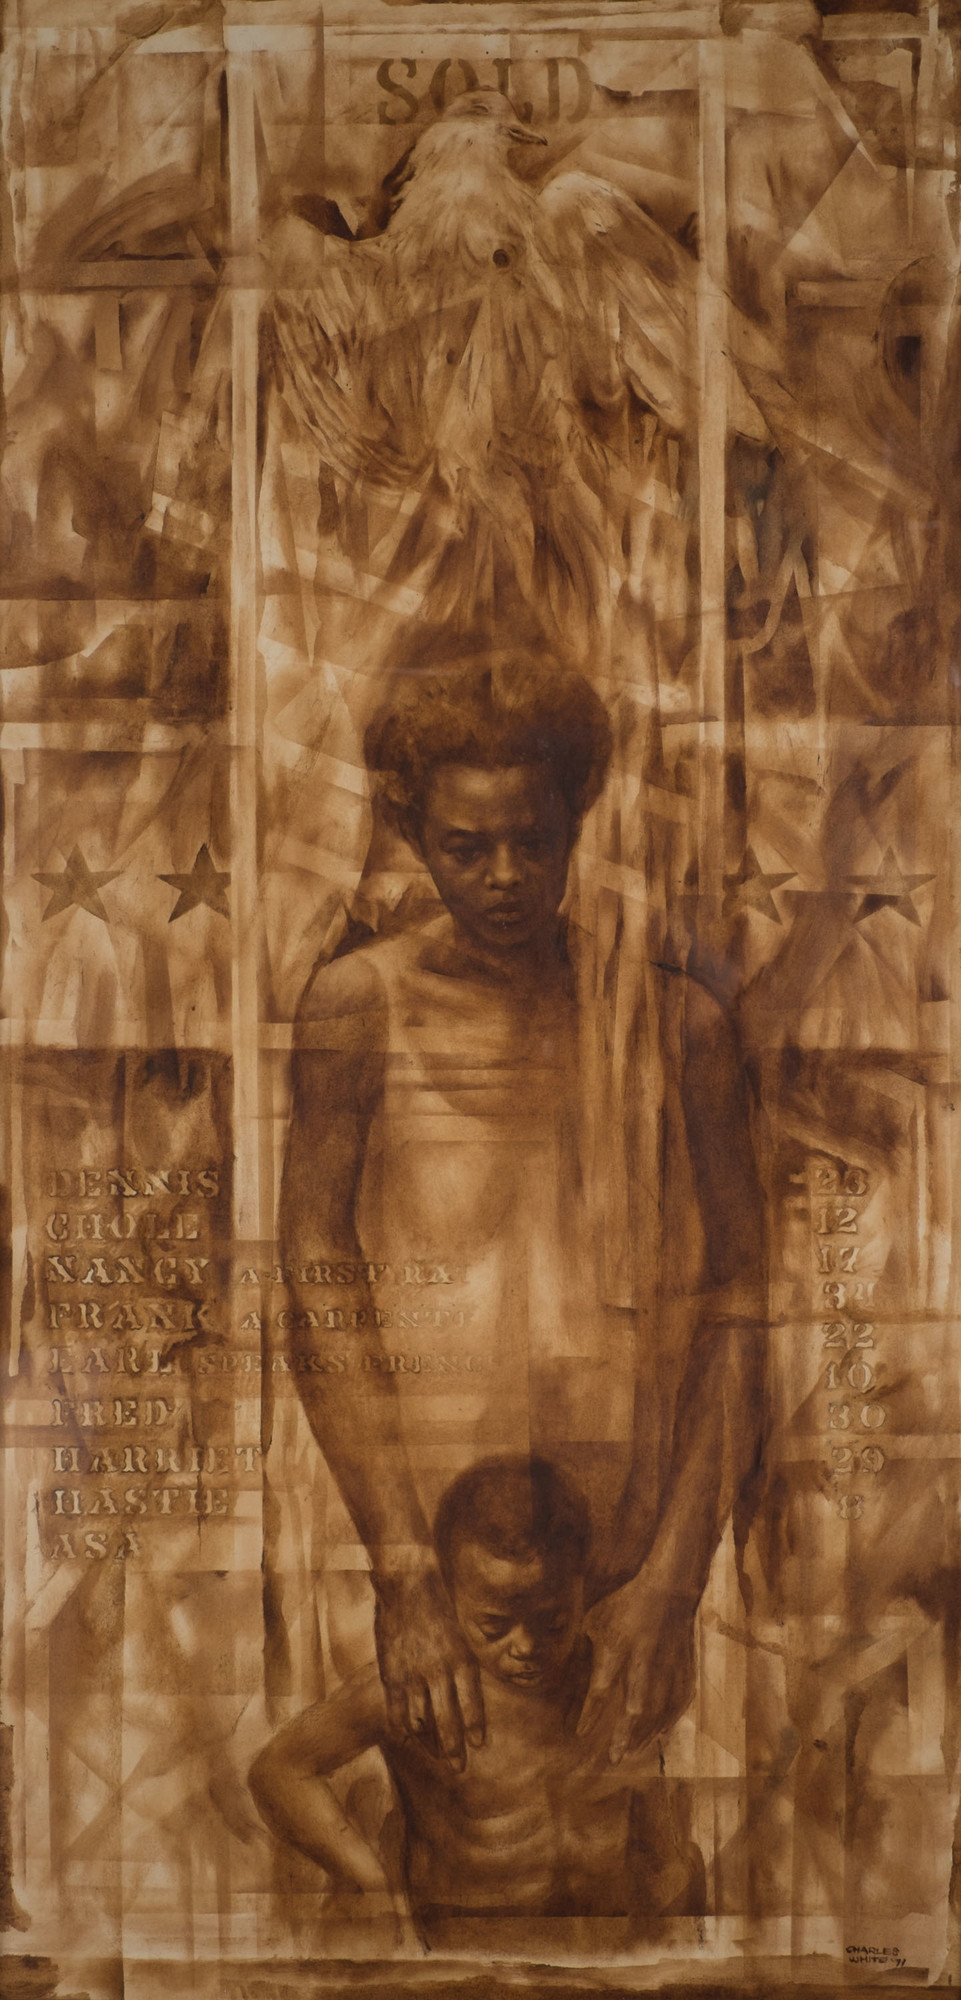 Charles White. _Wanted Poster Series #17_. 1971. Oil wash and pencil on poster board. 60 × 30" (152.4 × 76.2 cm). Collection of the Flint Institute of Arts, Flint, Michigan, Gift of Mr. and Mrs. B. Morris Pelavin. © The Charles White Archives